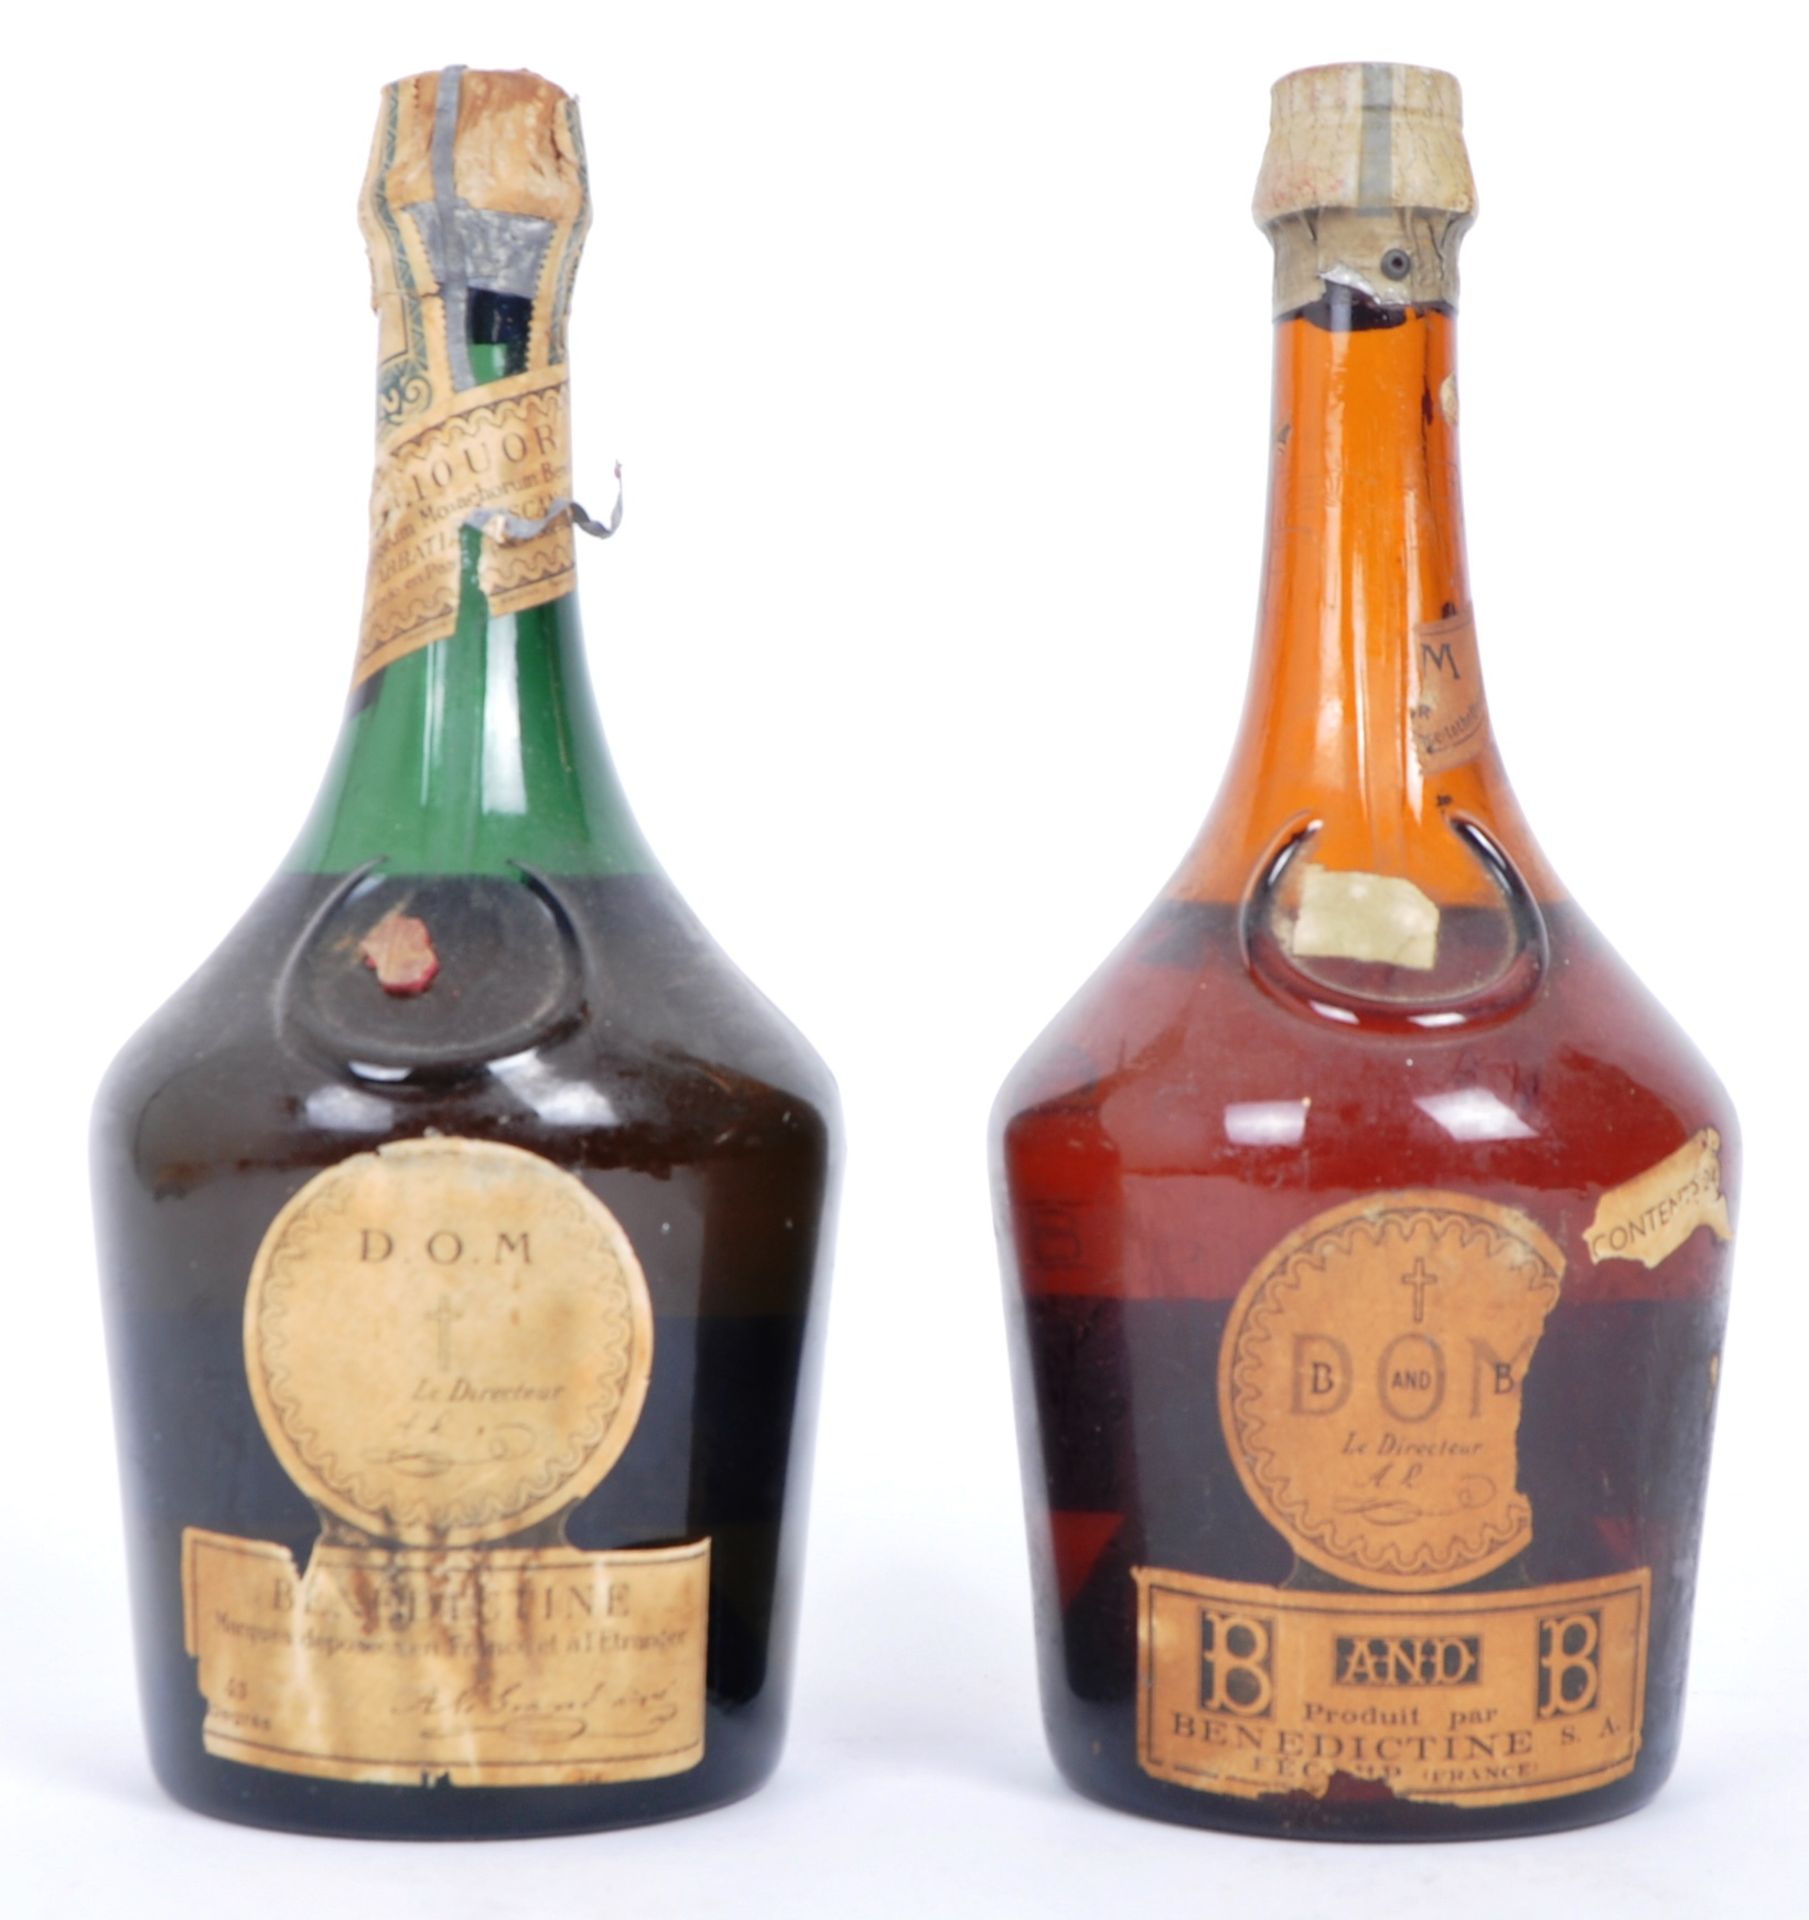 D.O.M. BENEDICTINE - TWO BOTTLES OF VINTAGE CHAMPAGNE